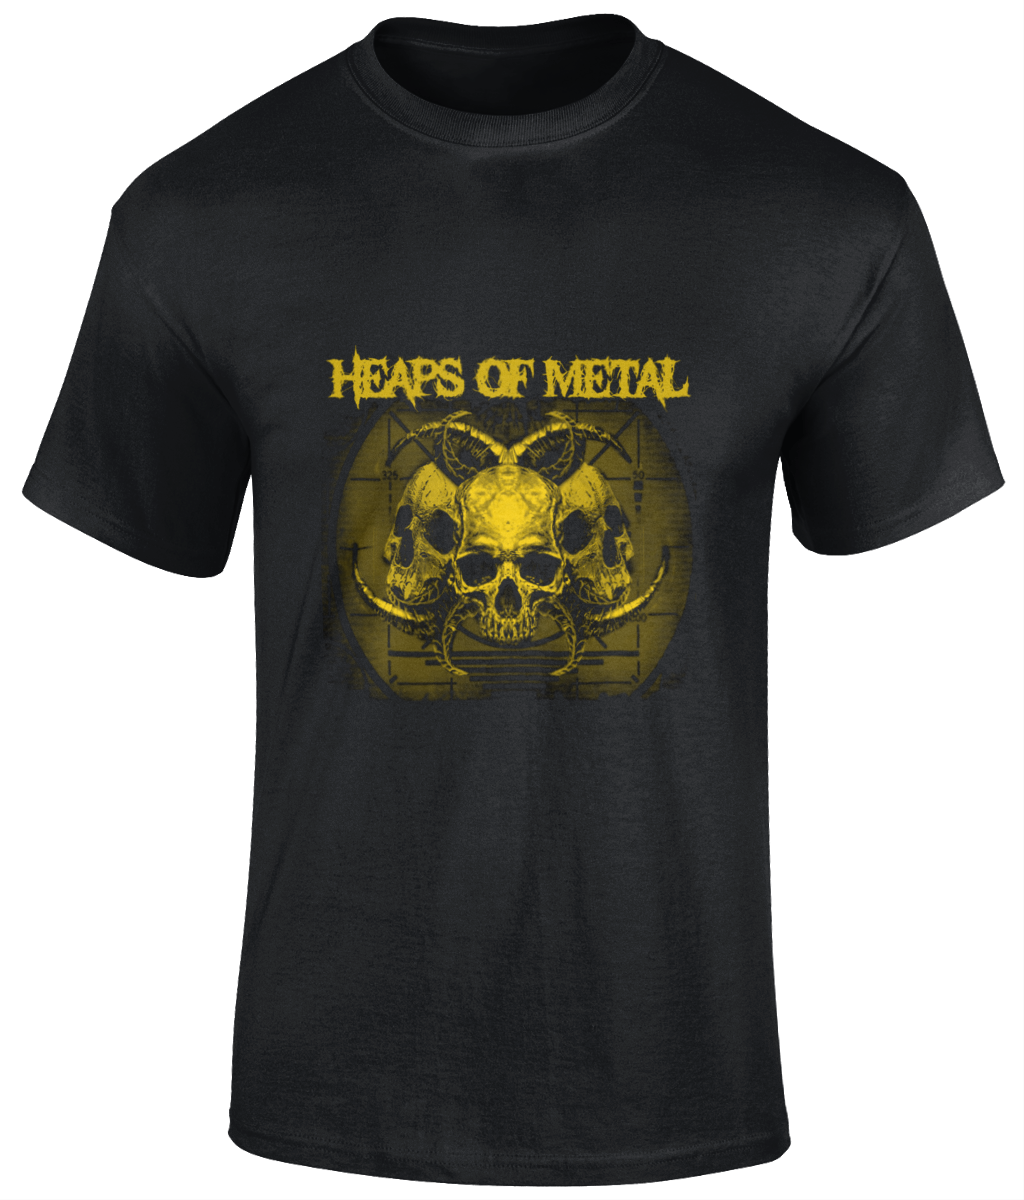 POISON VALLEY CLOTHING "HEAPS OF METAL ARTWORK YELLOW" unisex t shirt  Black t shirt with artwork  Material: 100% cotton.  Seamless twin needle collar. Taped neck and shoulders. Tubular body. Twin needle sleeves and hem. sizes small to 5XL